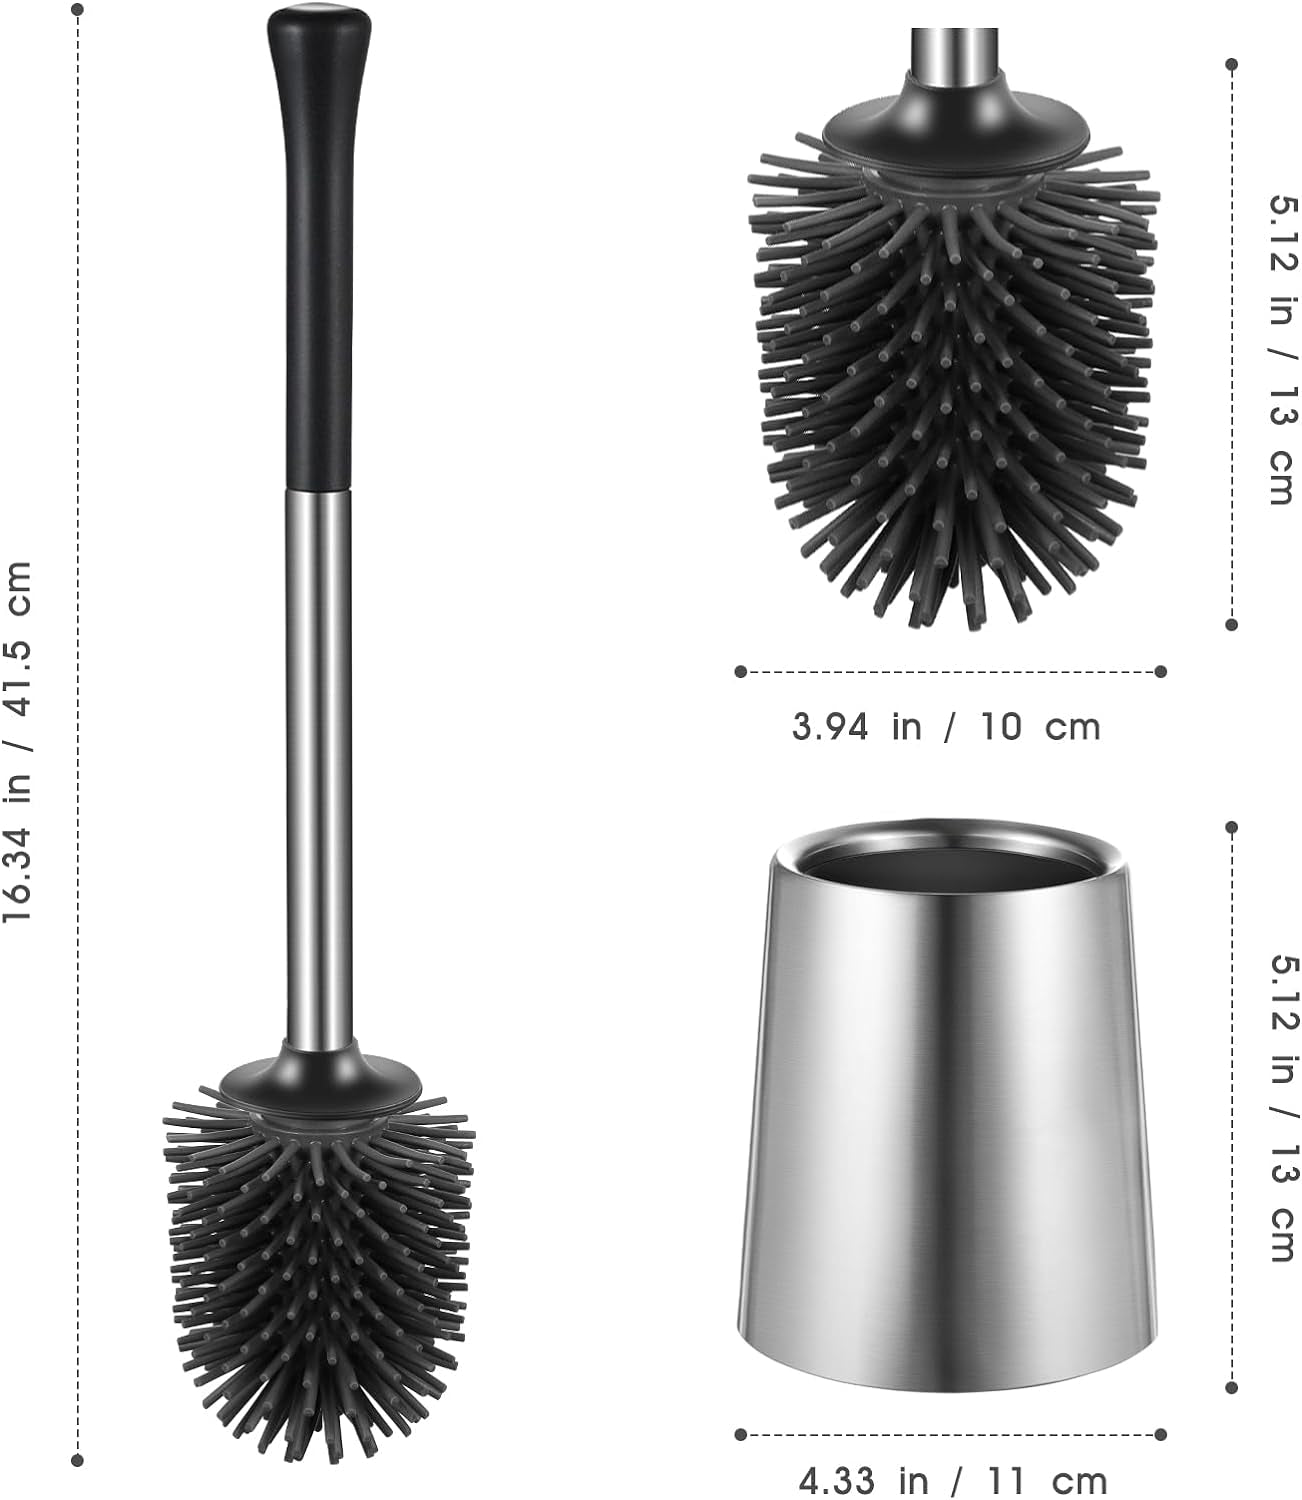 Toilet Bowl Brush Holder Set: Silicone Stainless Steel Deep Cleaning Toilet Cleaner Brush for Bathroom Restroom - Compact Modern Rv Toilet Scrubber Accessories with Caddy